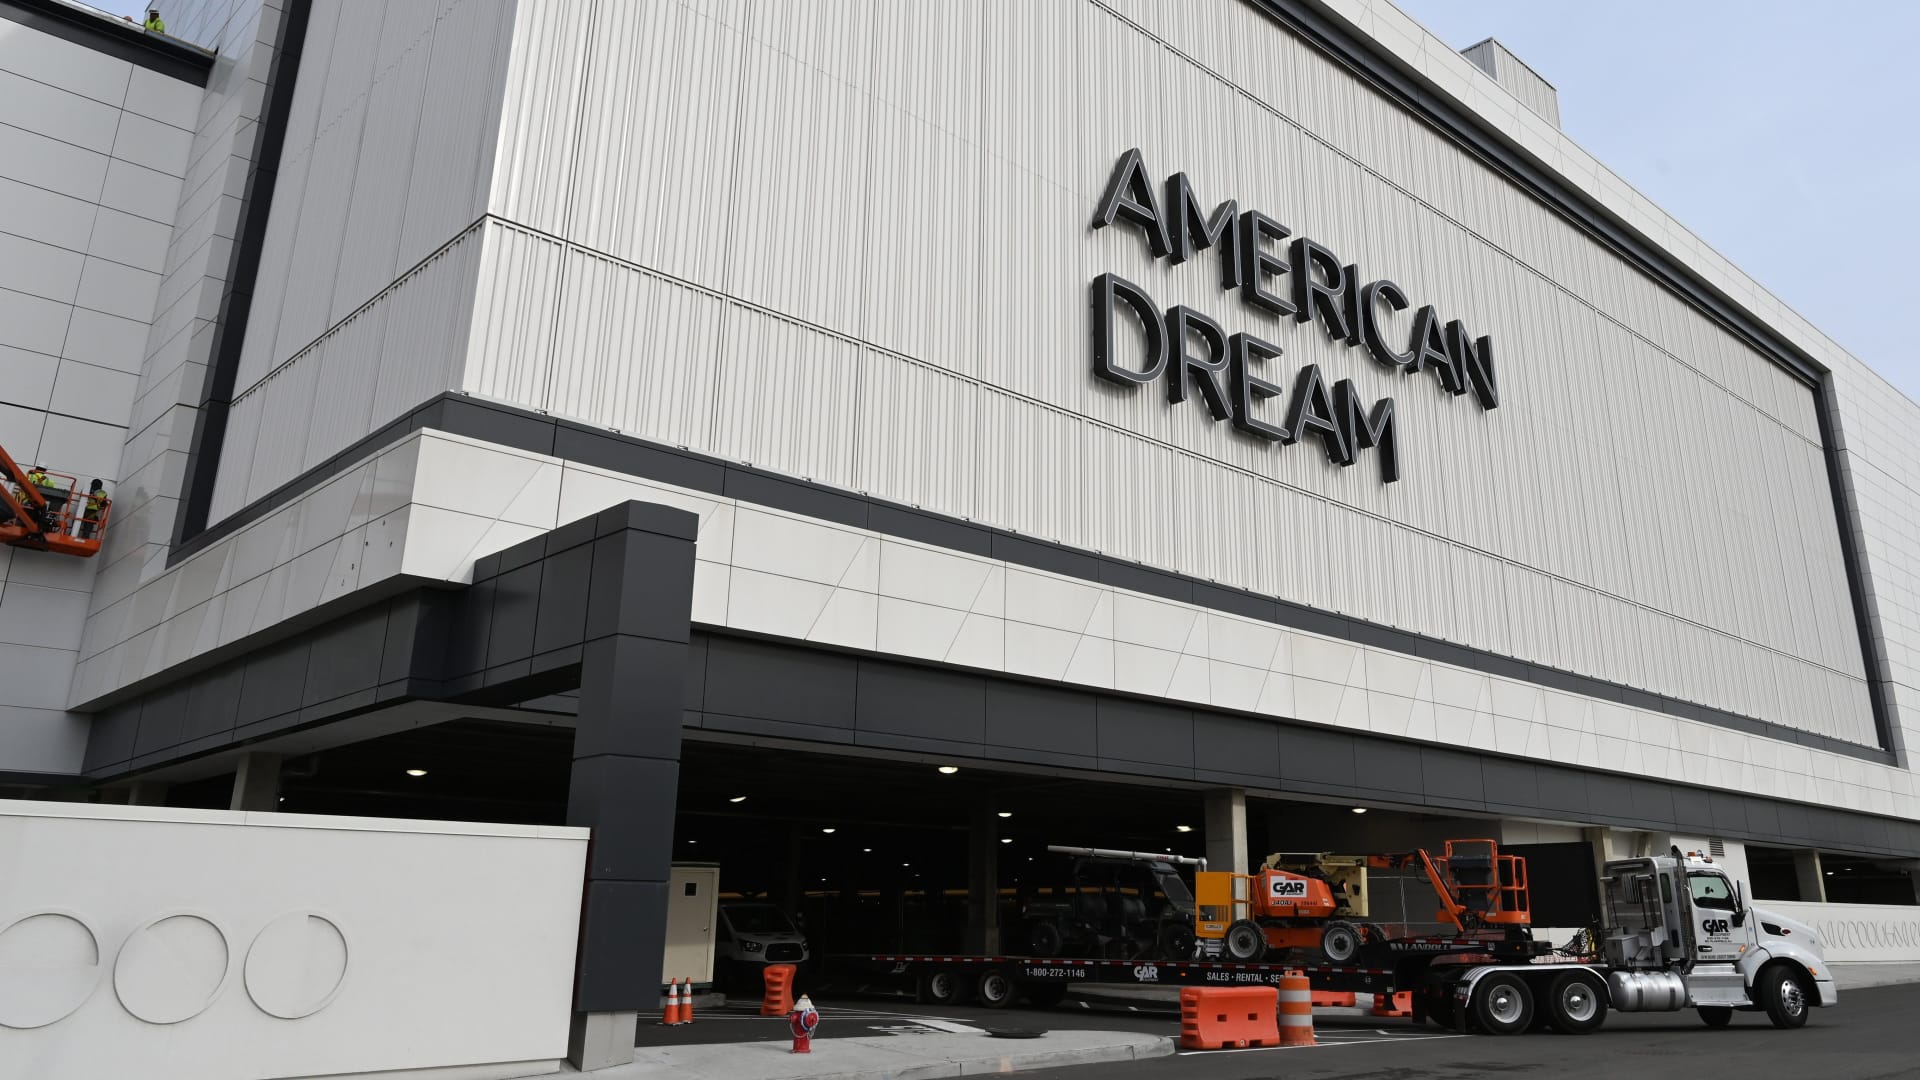 American Dream mall in N.J. briefly evacuated on Black Friday over bomb threat